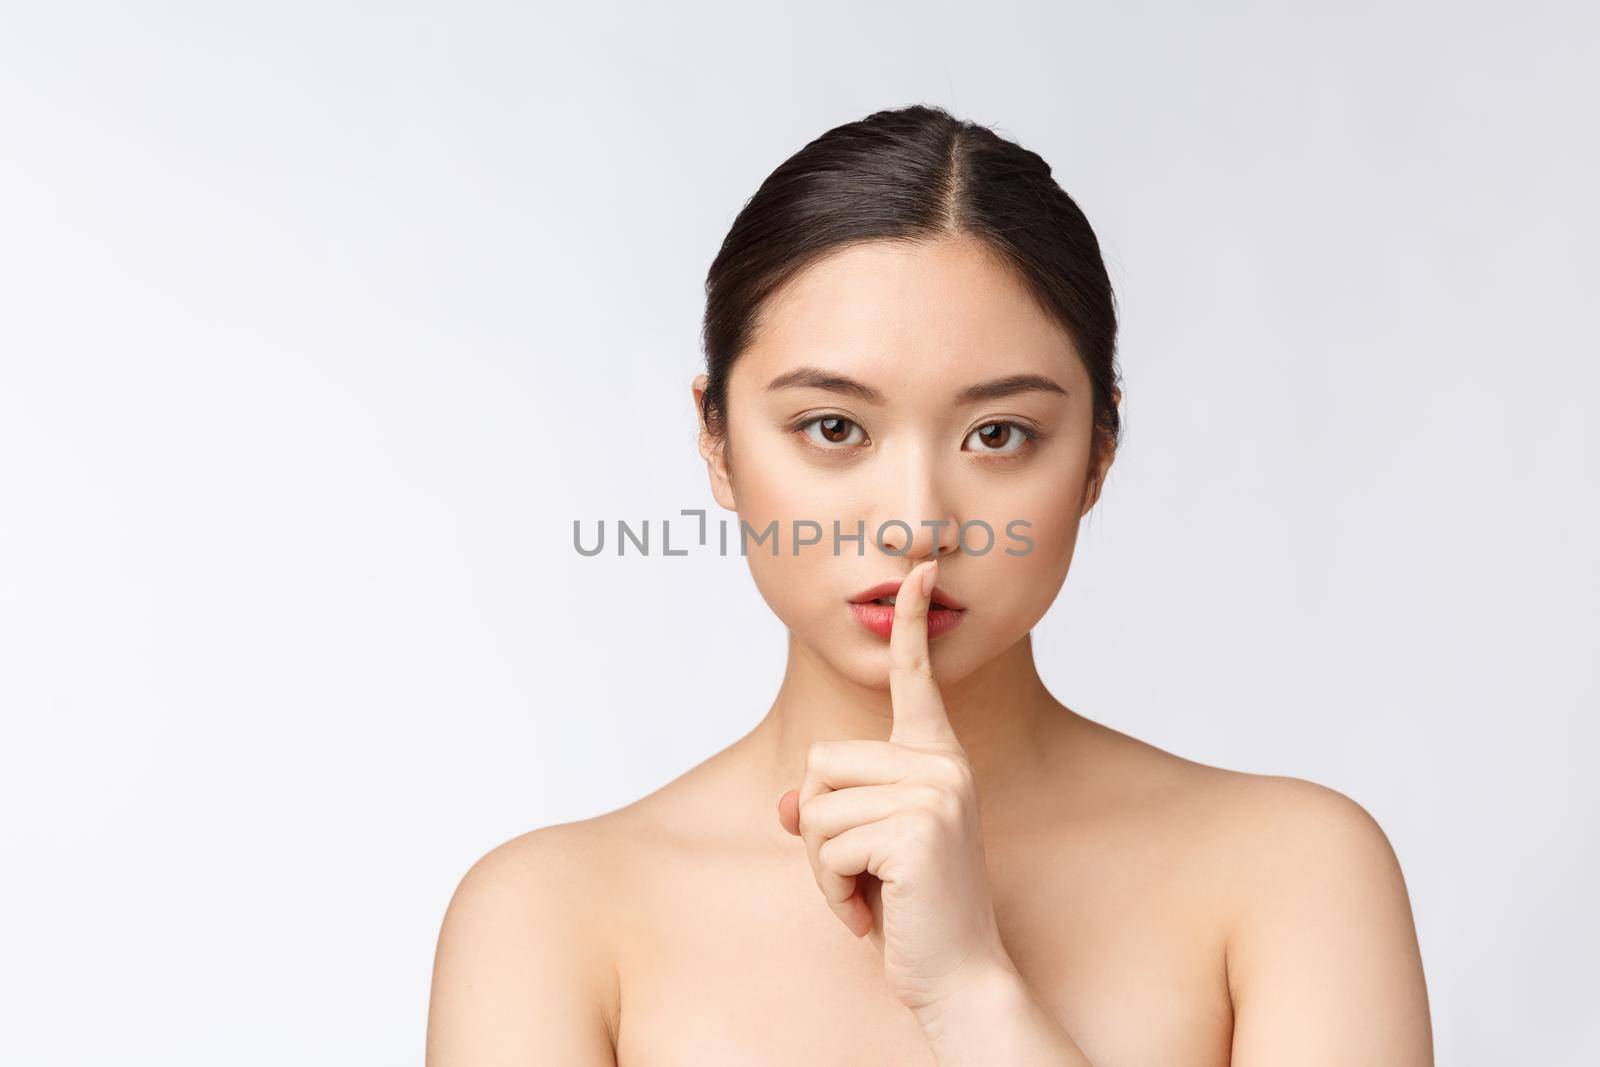 Portrait of asian woman making a hush gesture with finger on lips, isolated on white background.